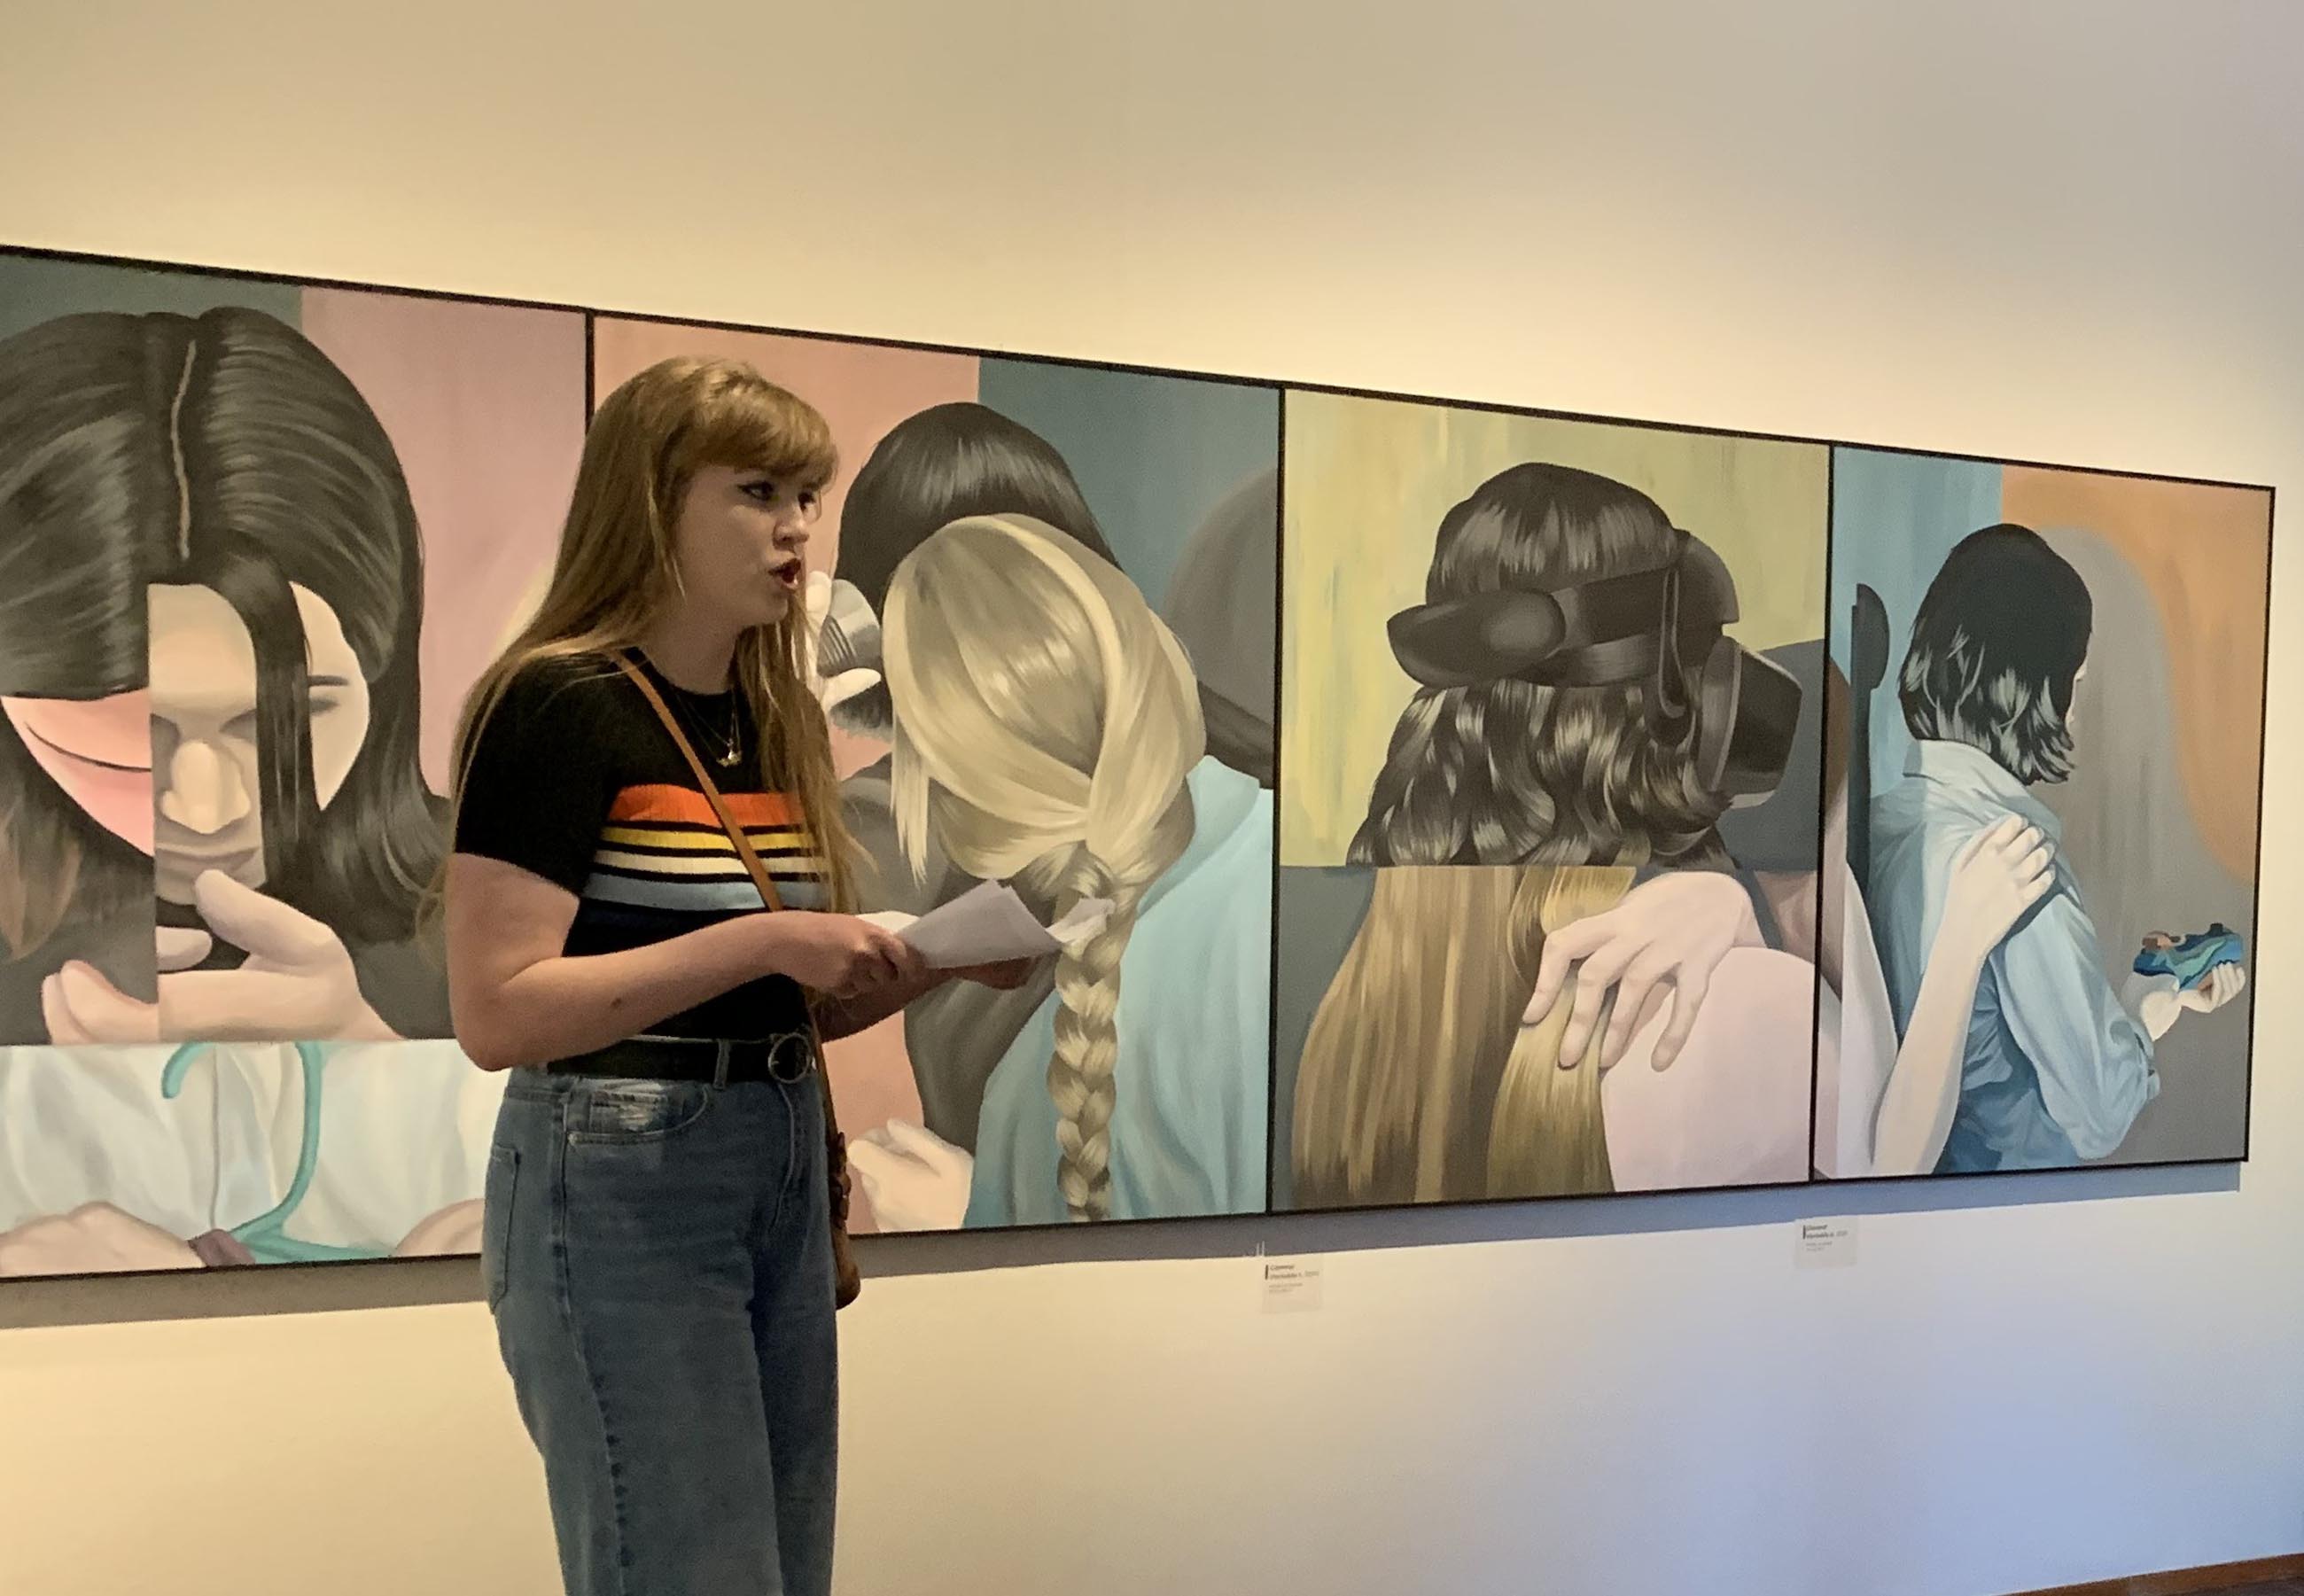 A person standing in front of a very long painting